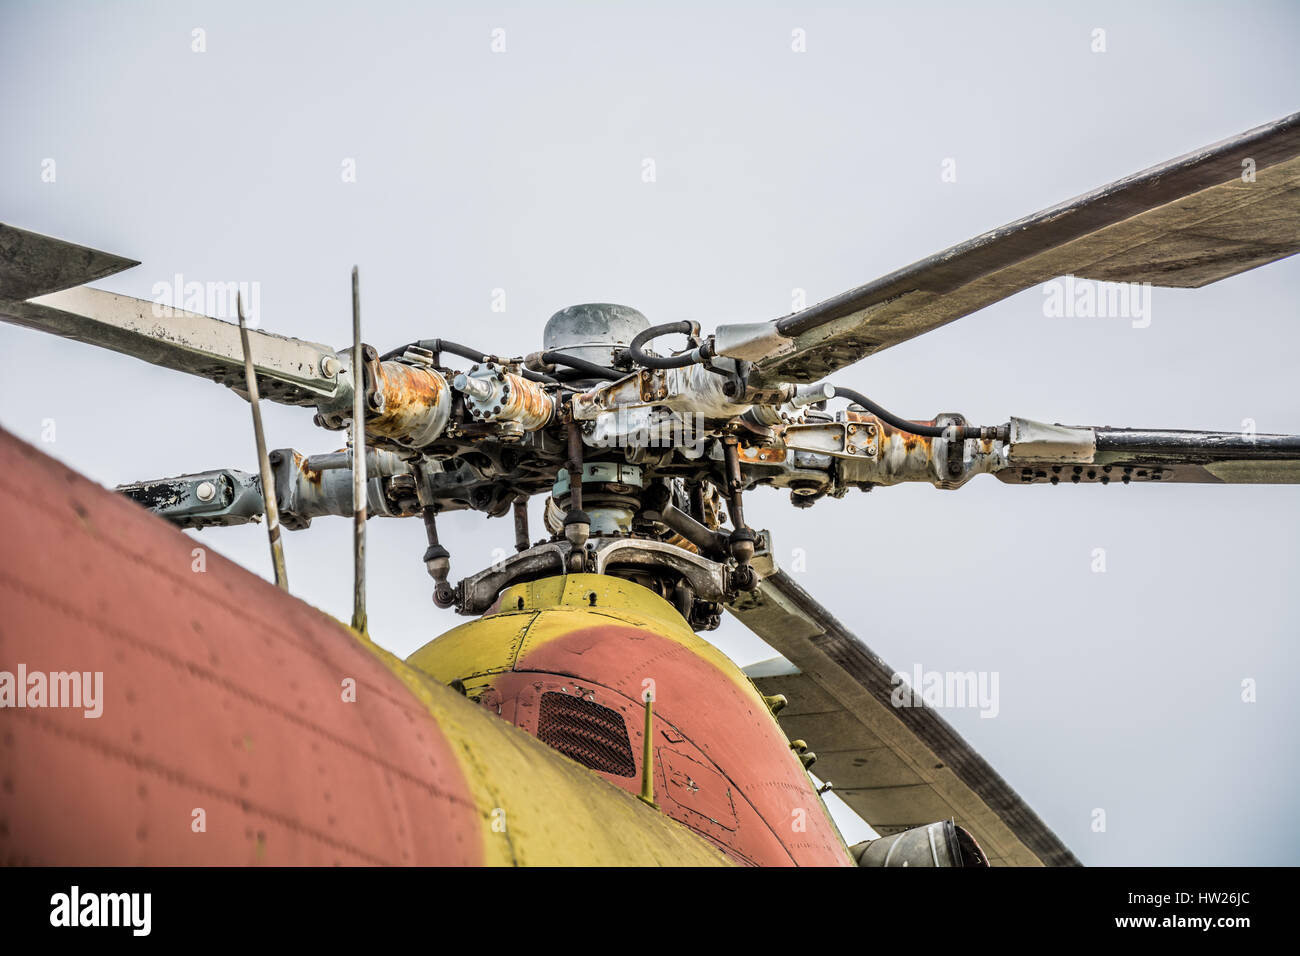 Propeller of old helicopter Stock Photo